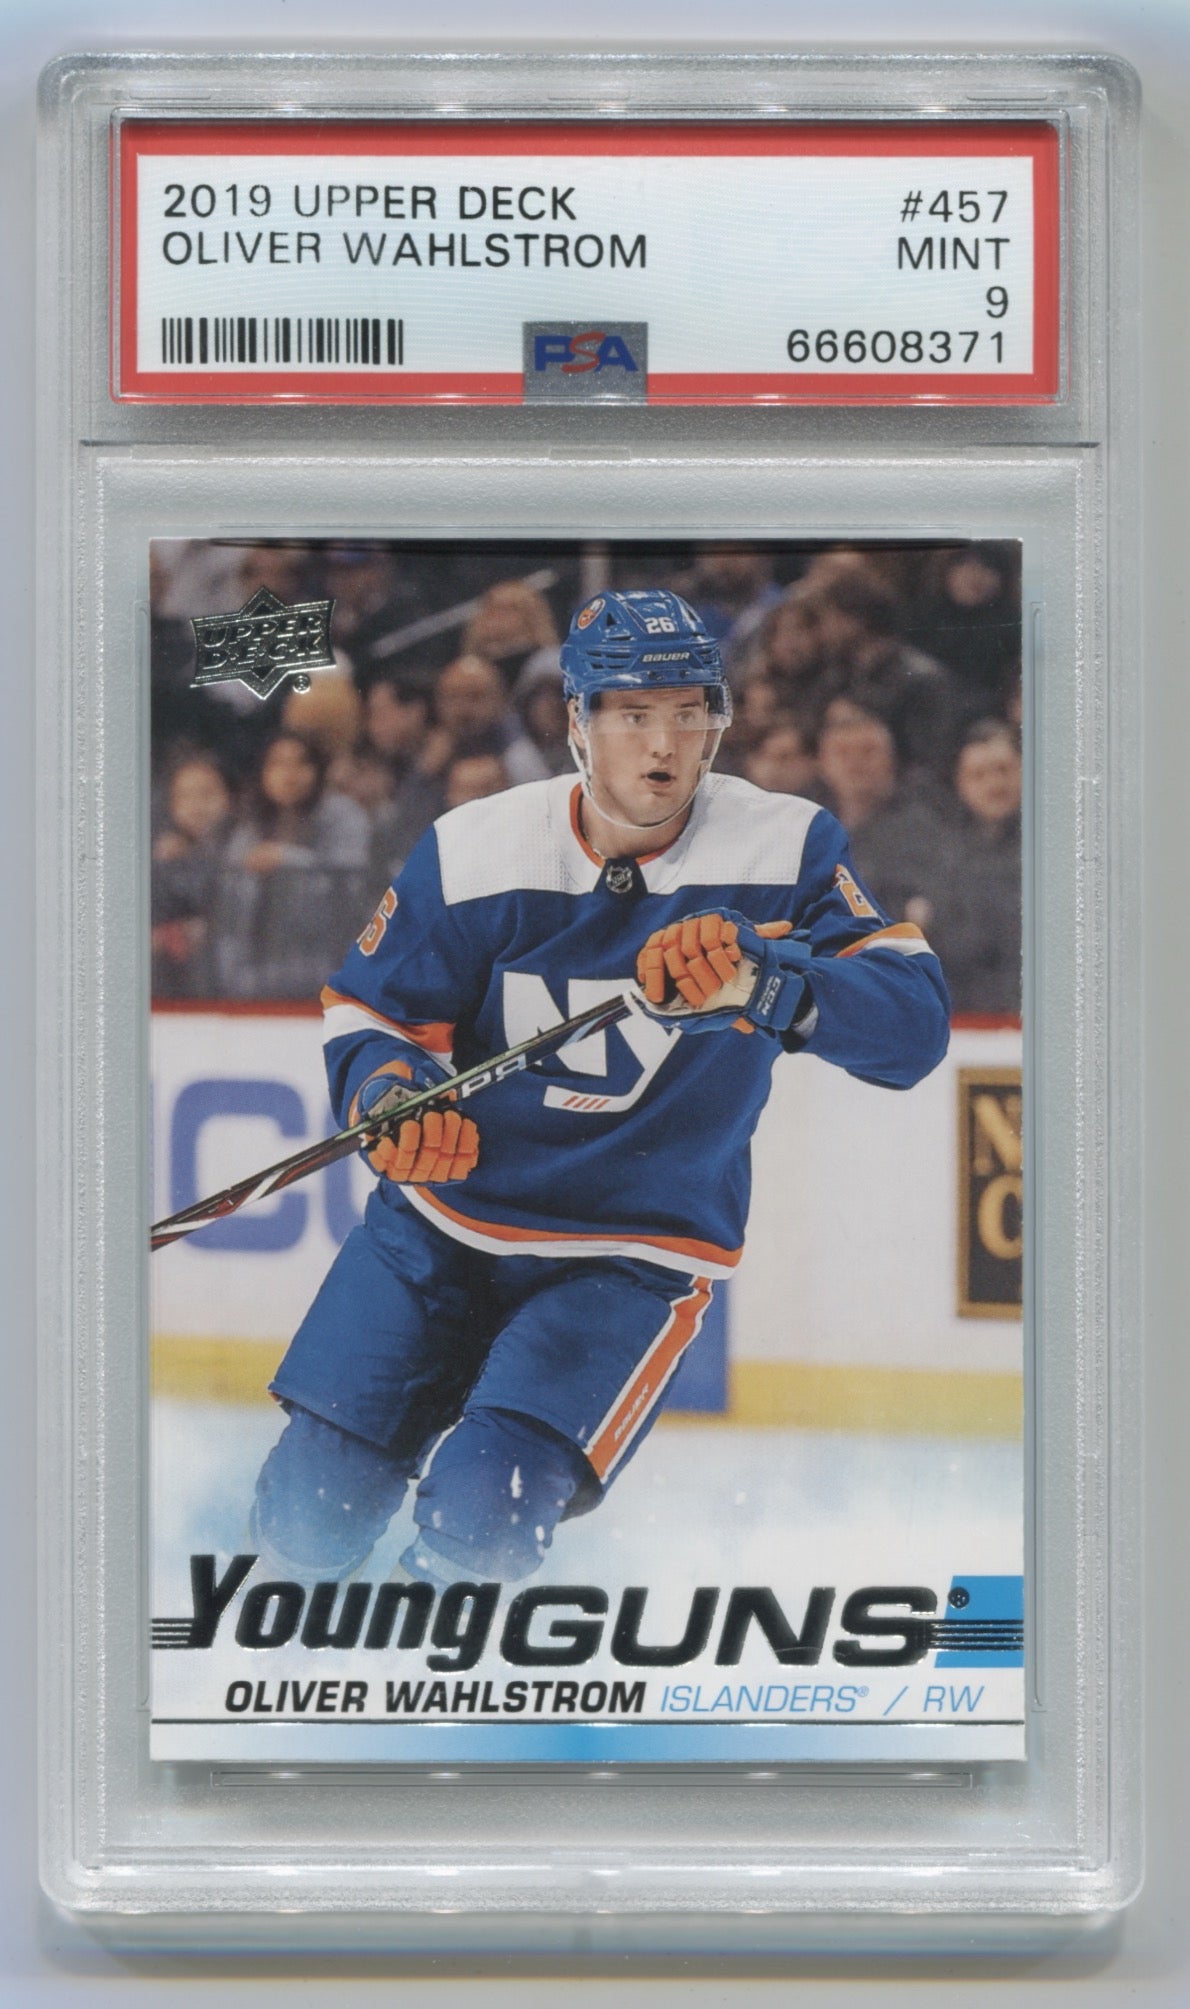 2019-20 Upper Deck #457 Oliver Wahlstrom PSA 9 (Rookie) | Eastridge Sports Cards